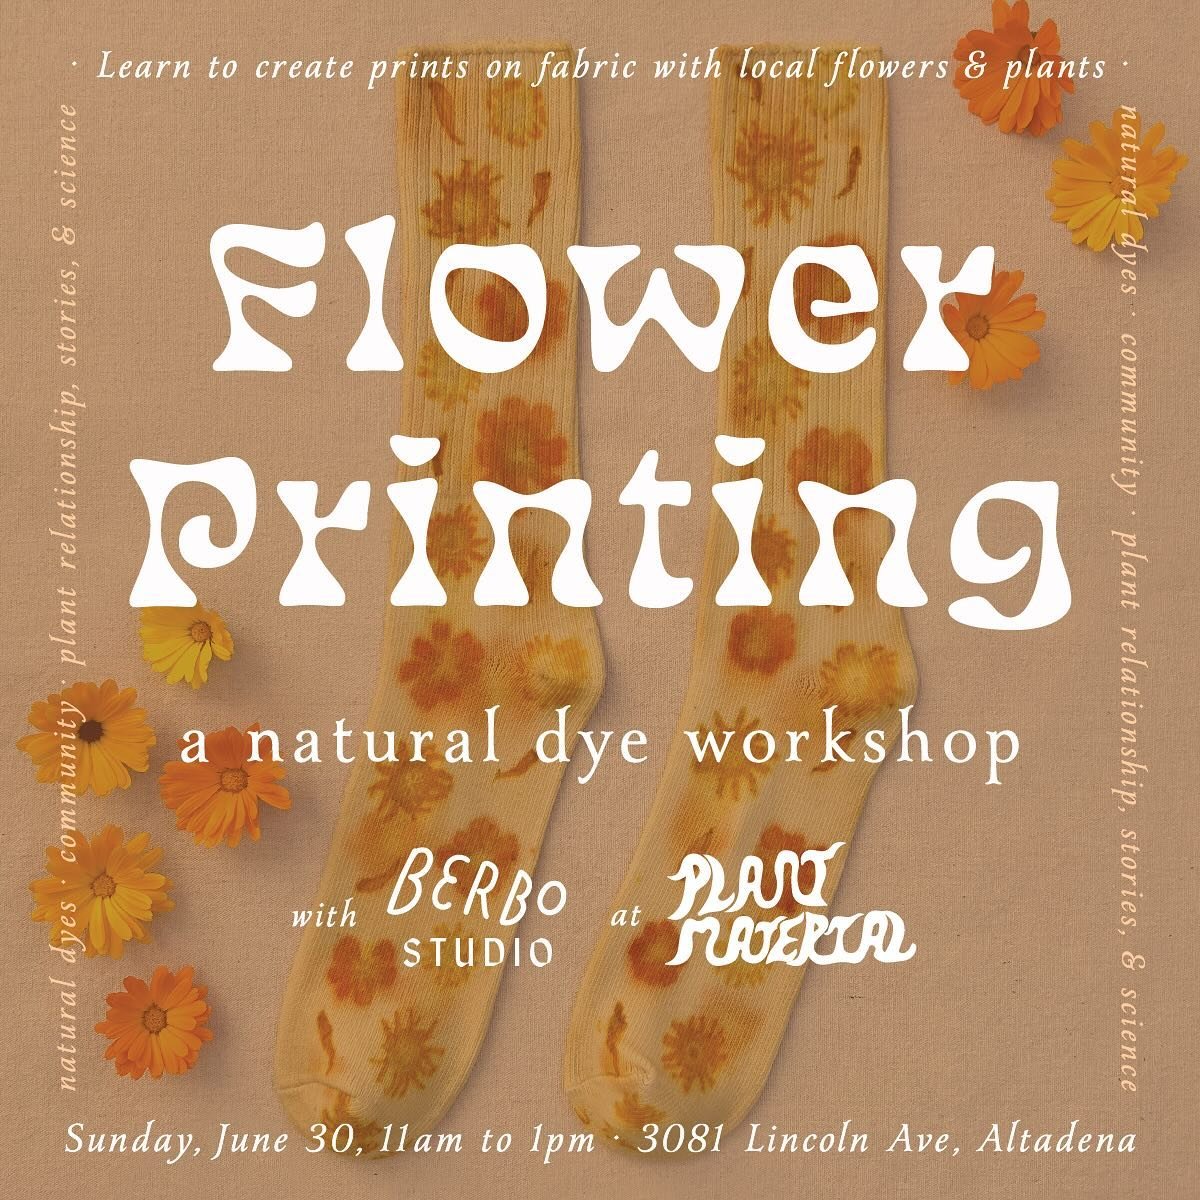 The longer, warmer days of summer mean forests and gardens alike are filled with flowers&mdash;learn to translate their shapes and colors with the natural dyeing technique of eco-printing. 

On June 30th, we&rsquo;ll gather at @plant_material&rsquo;s